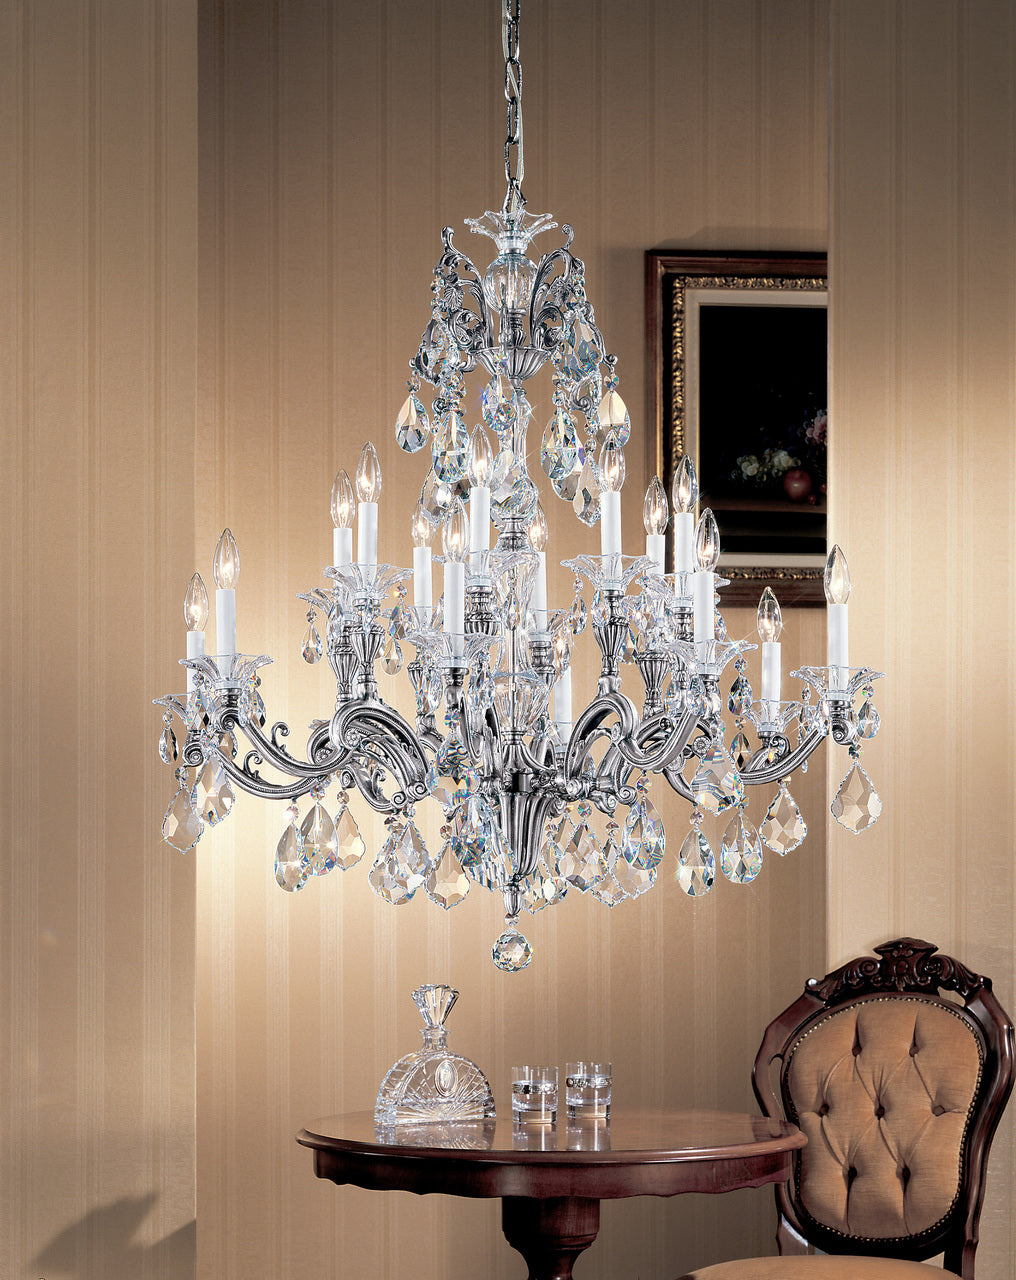 Classic Lighting 57116 MS CBK Via Firenze Crystal Chandelier in Millennium Silver (Imported from Spain)